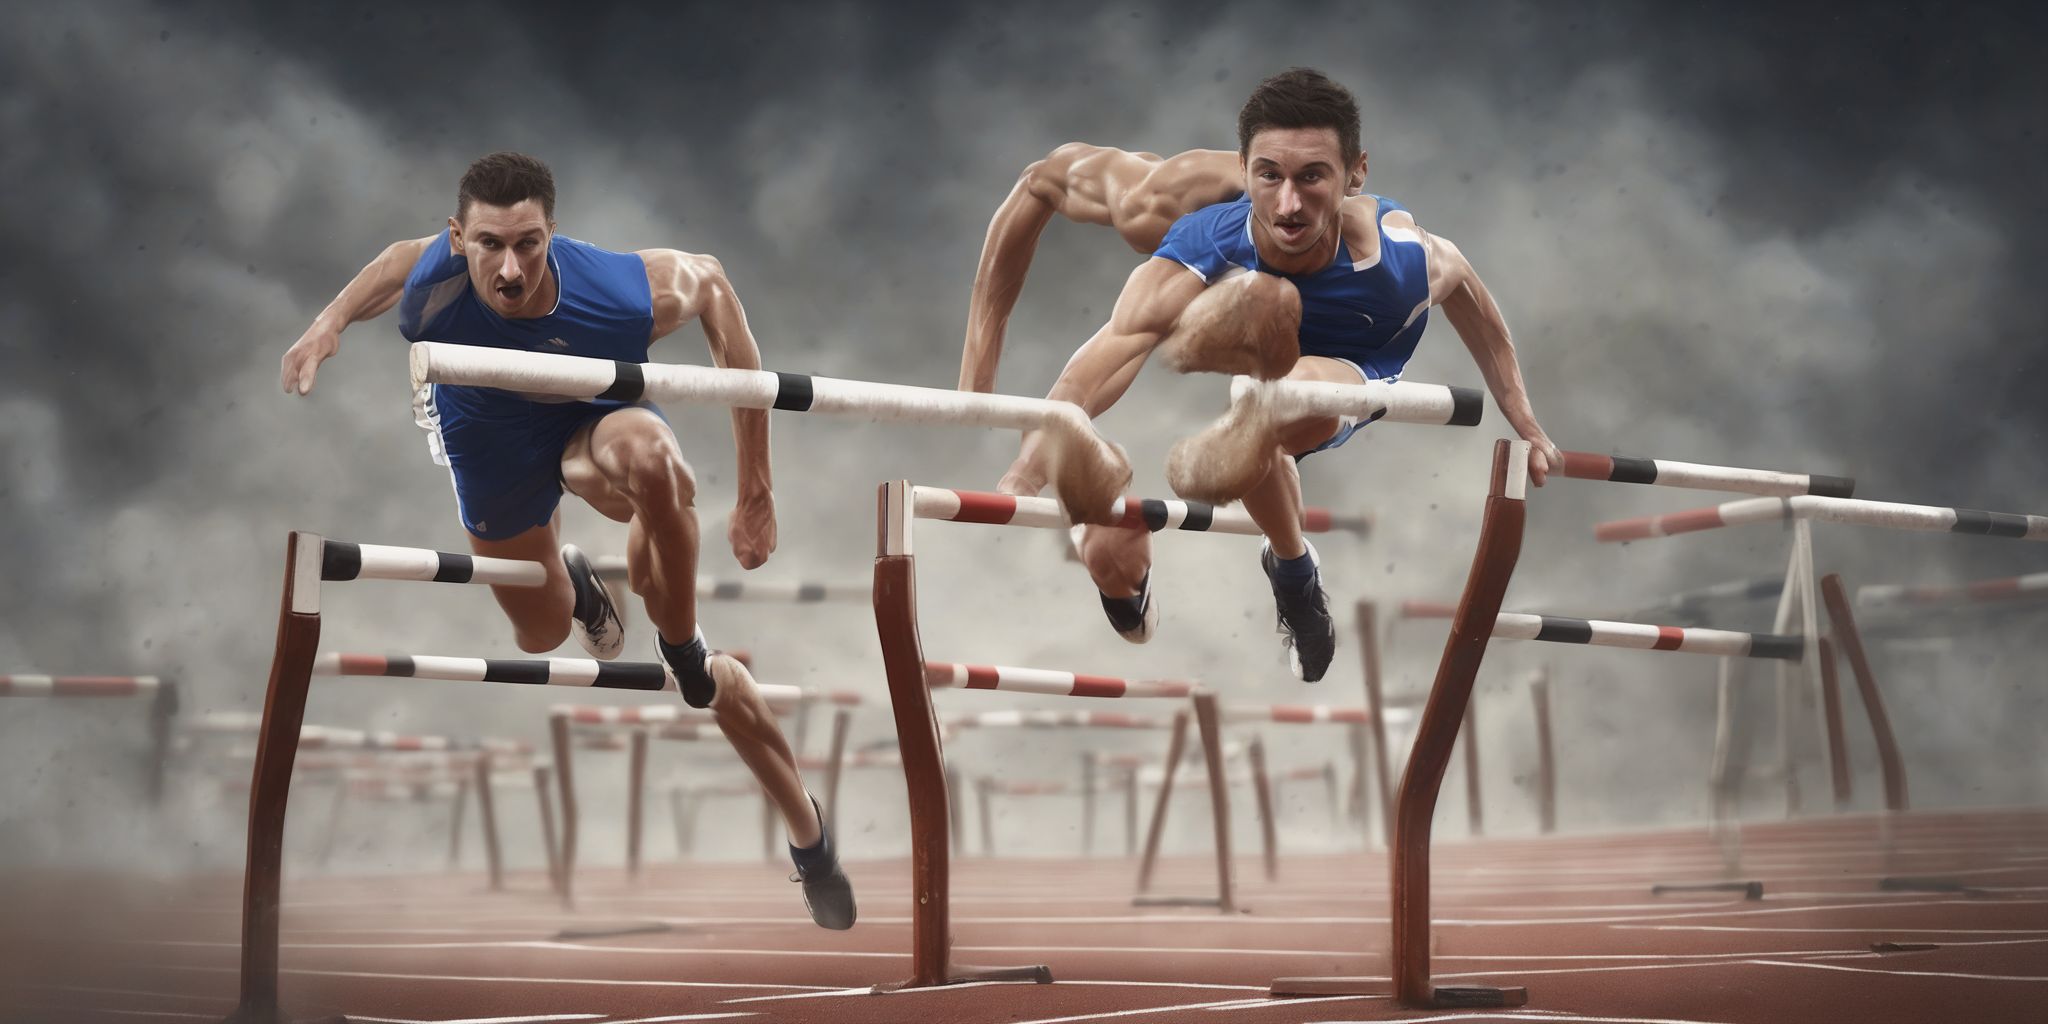 Last hurdle  in realistic, photographic style